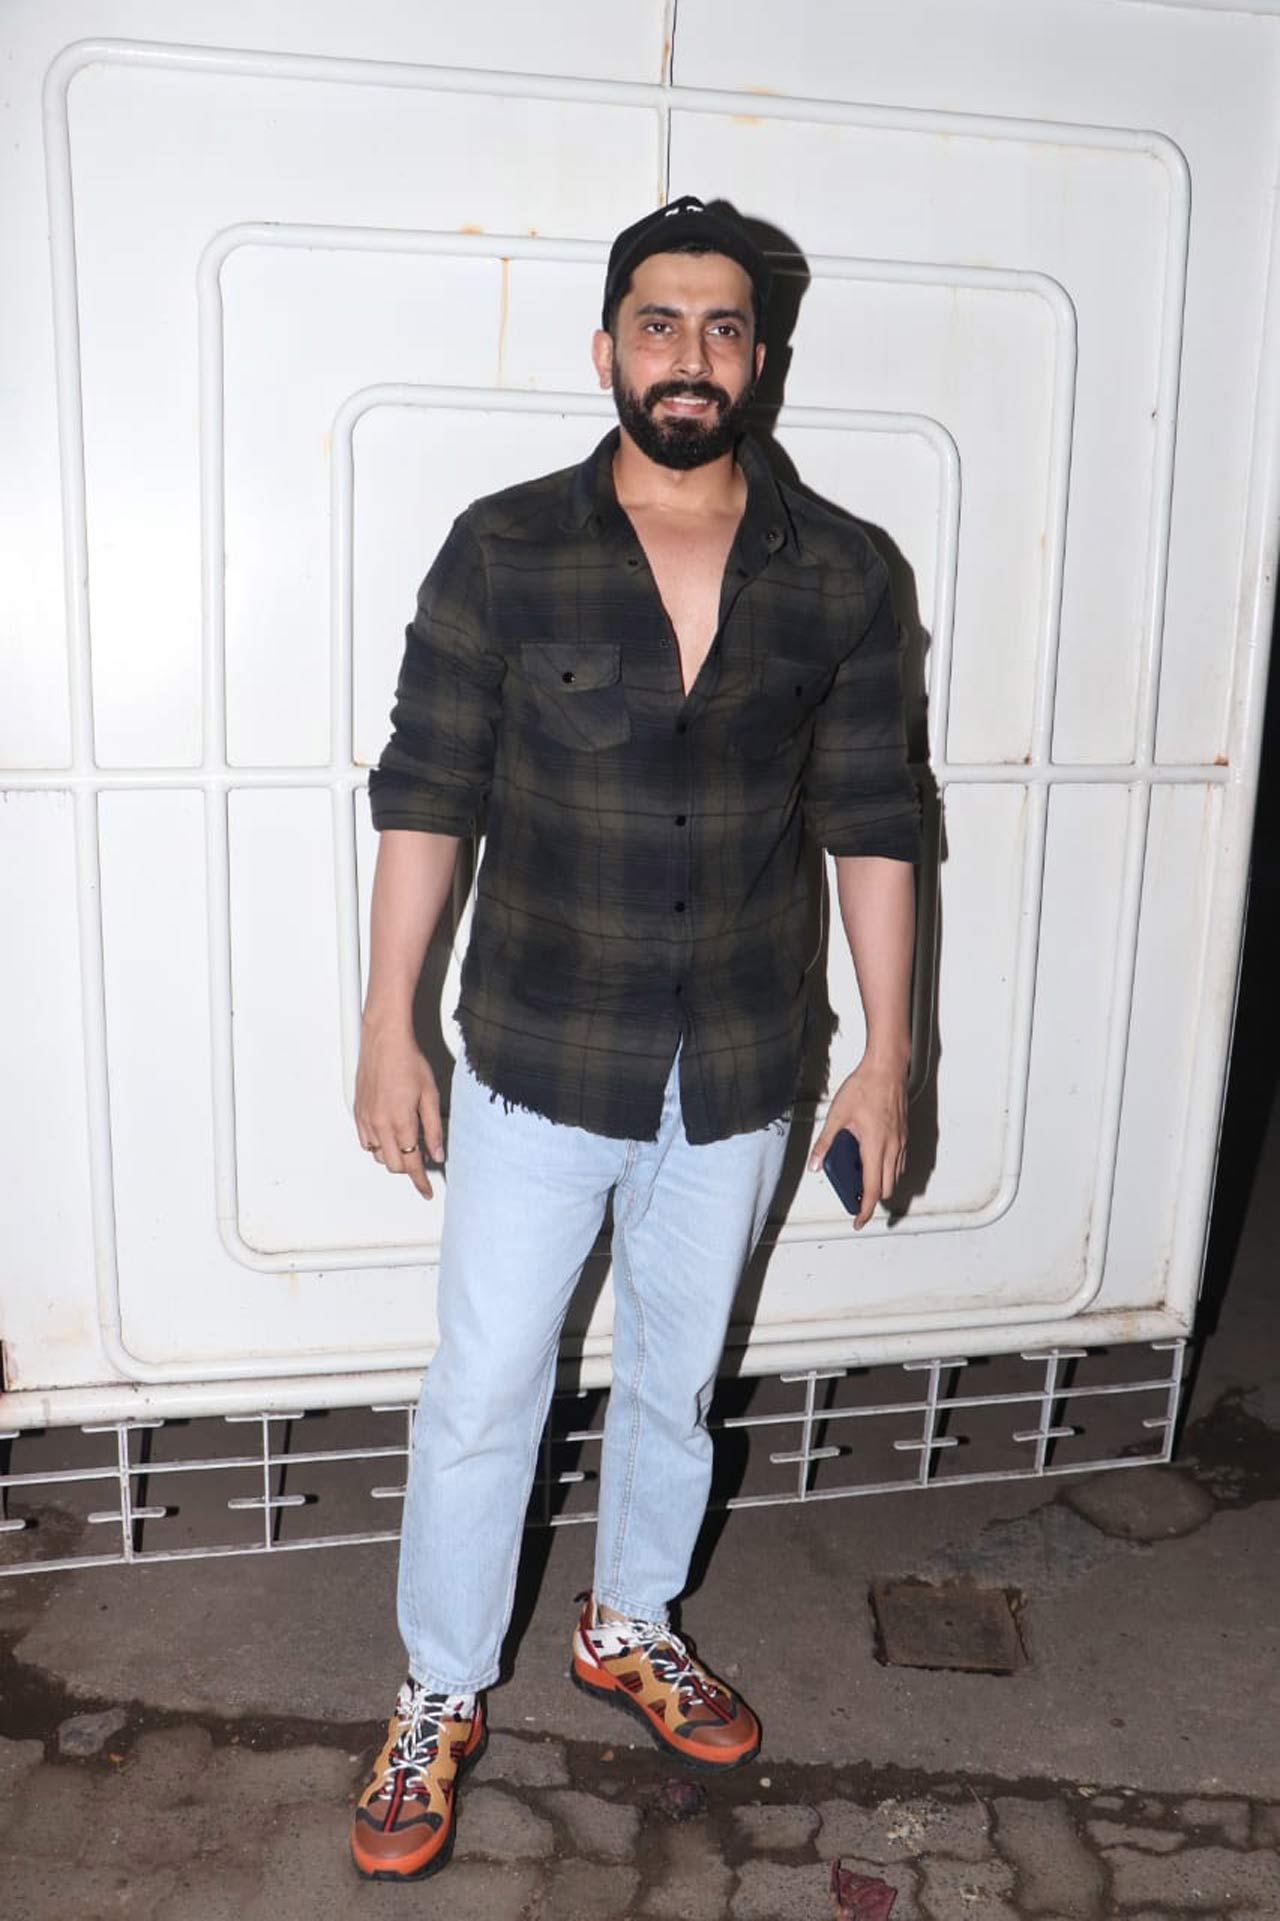 Sunny Singh also appeared at the show to share support to one of his co-stars Nushrratt Baruccha, who was also a part of the Punchnama series. The team must have surely missed Kartik Aaryan as he is busy shooting for his next project in Delhi.